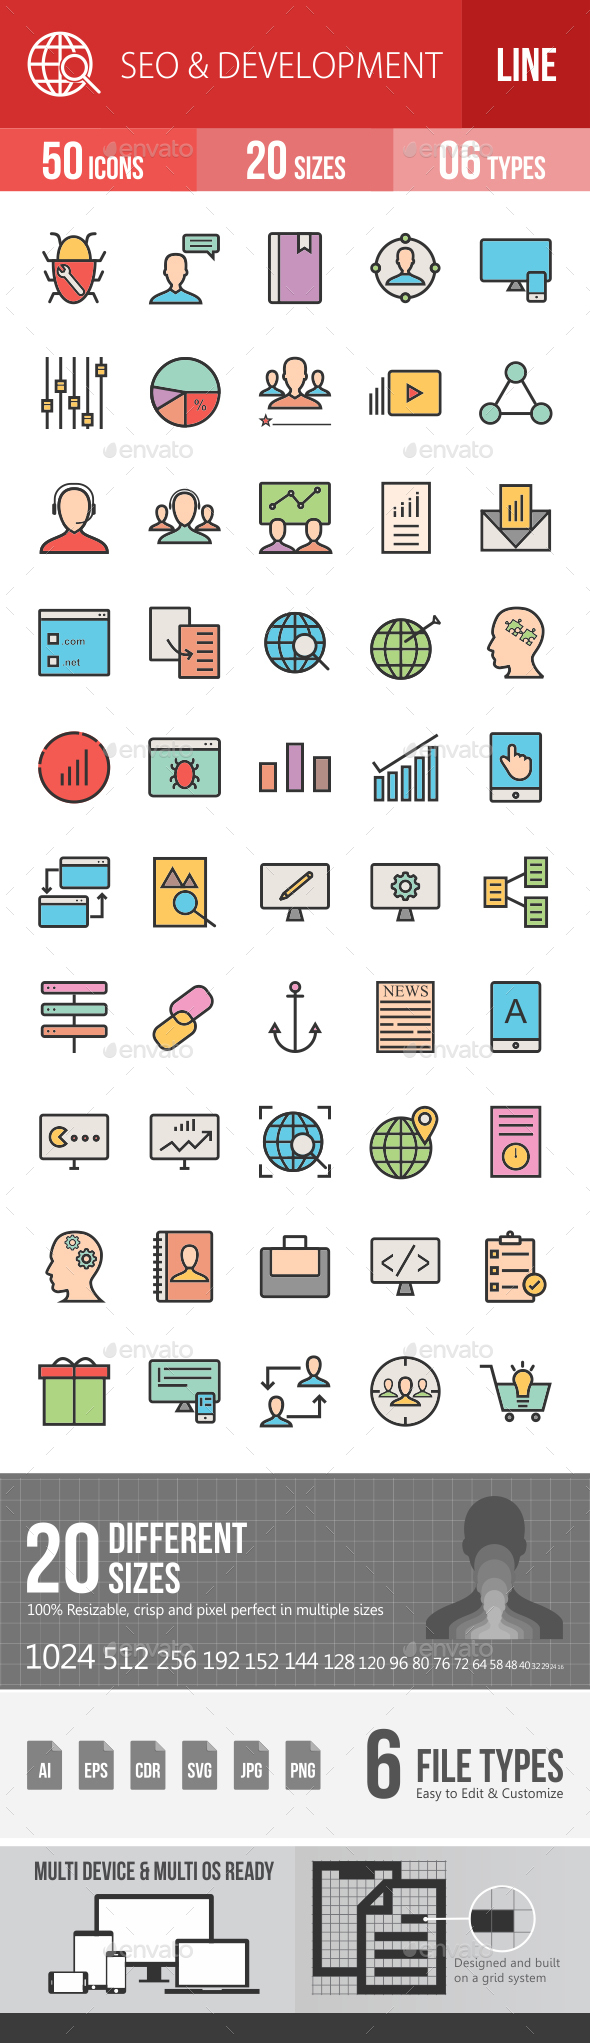 SEO & Development Services Filled Line Icons